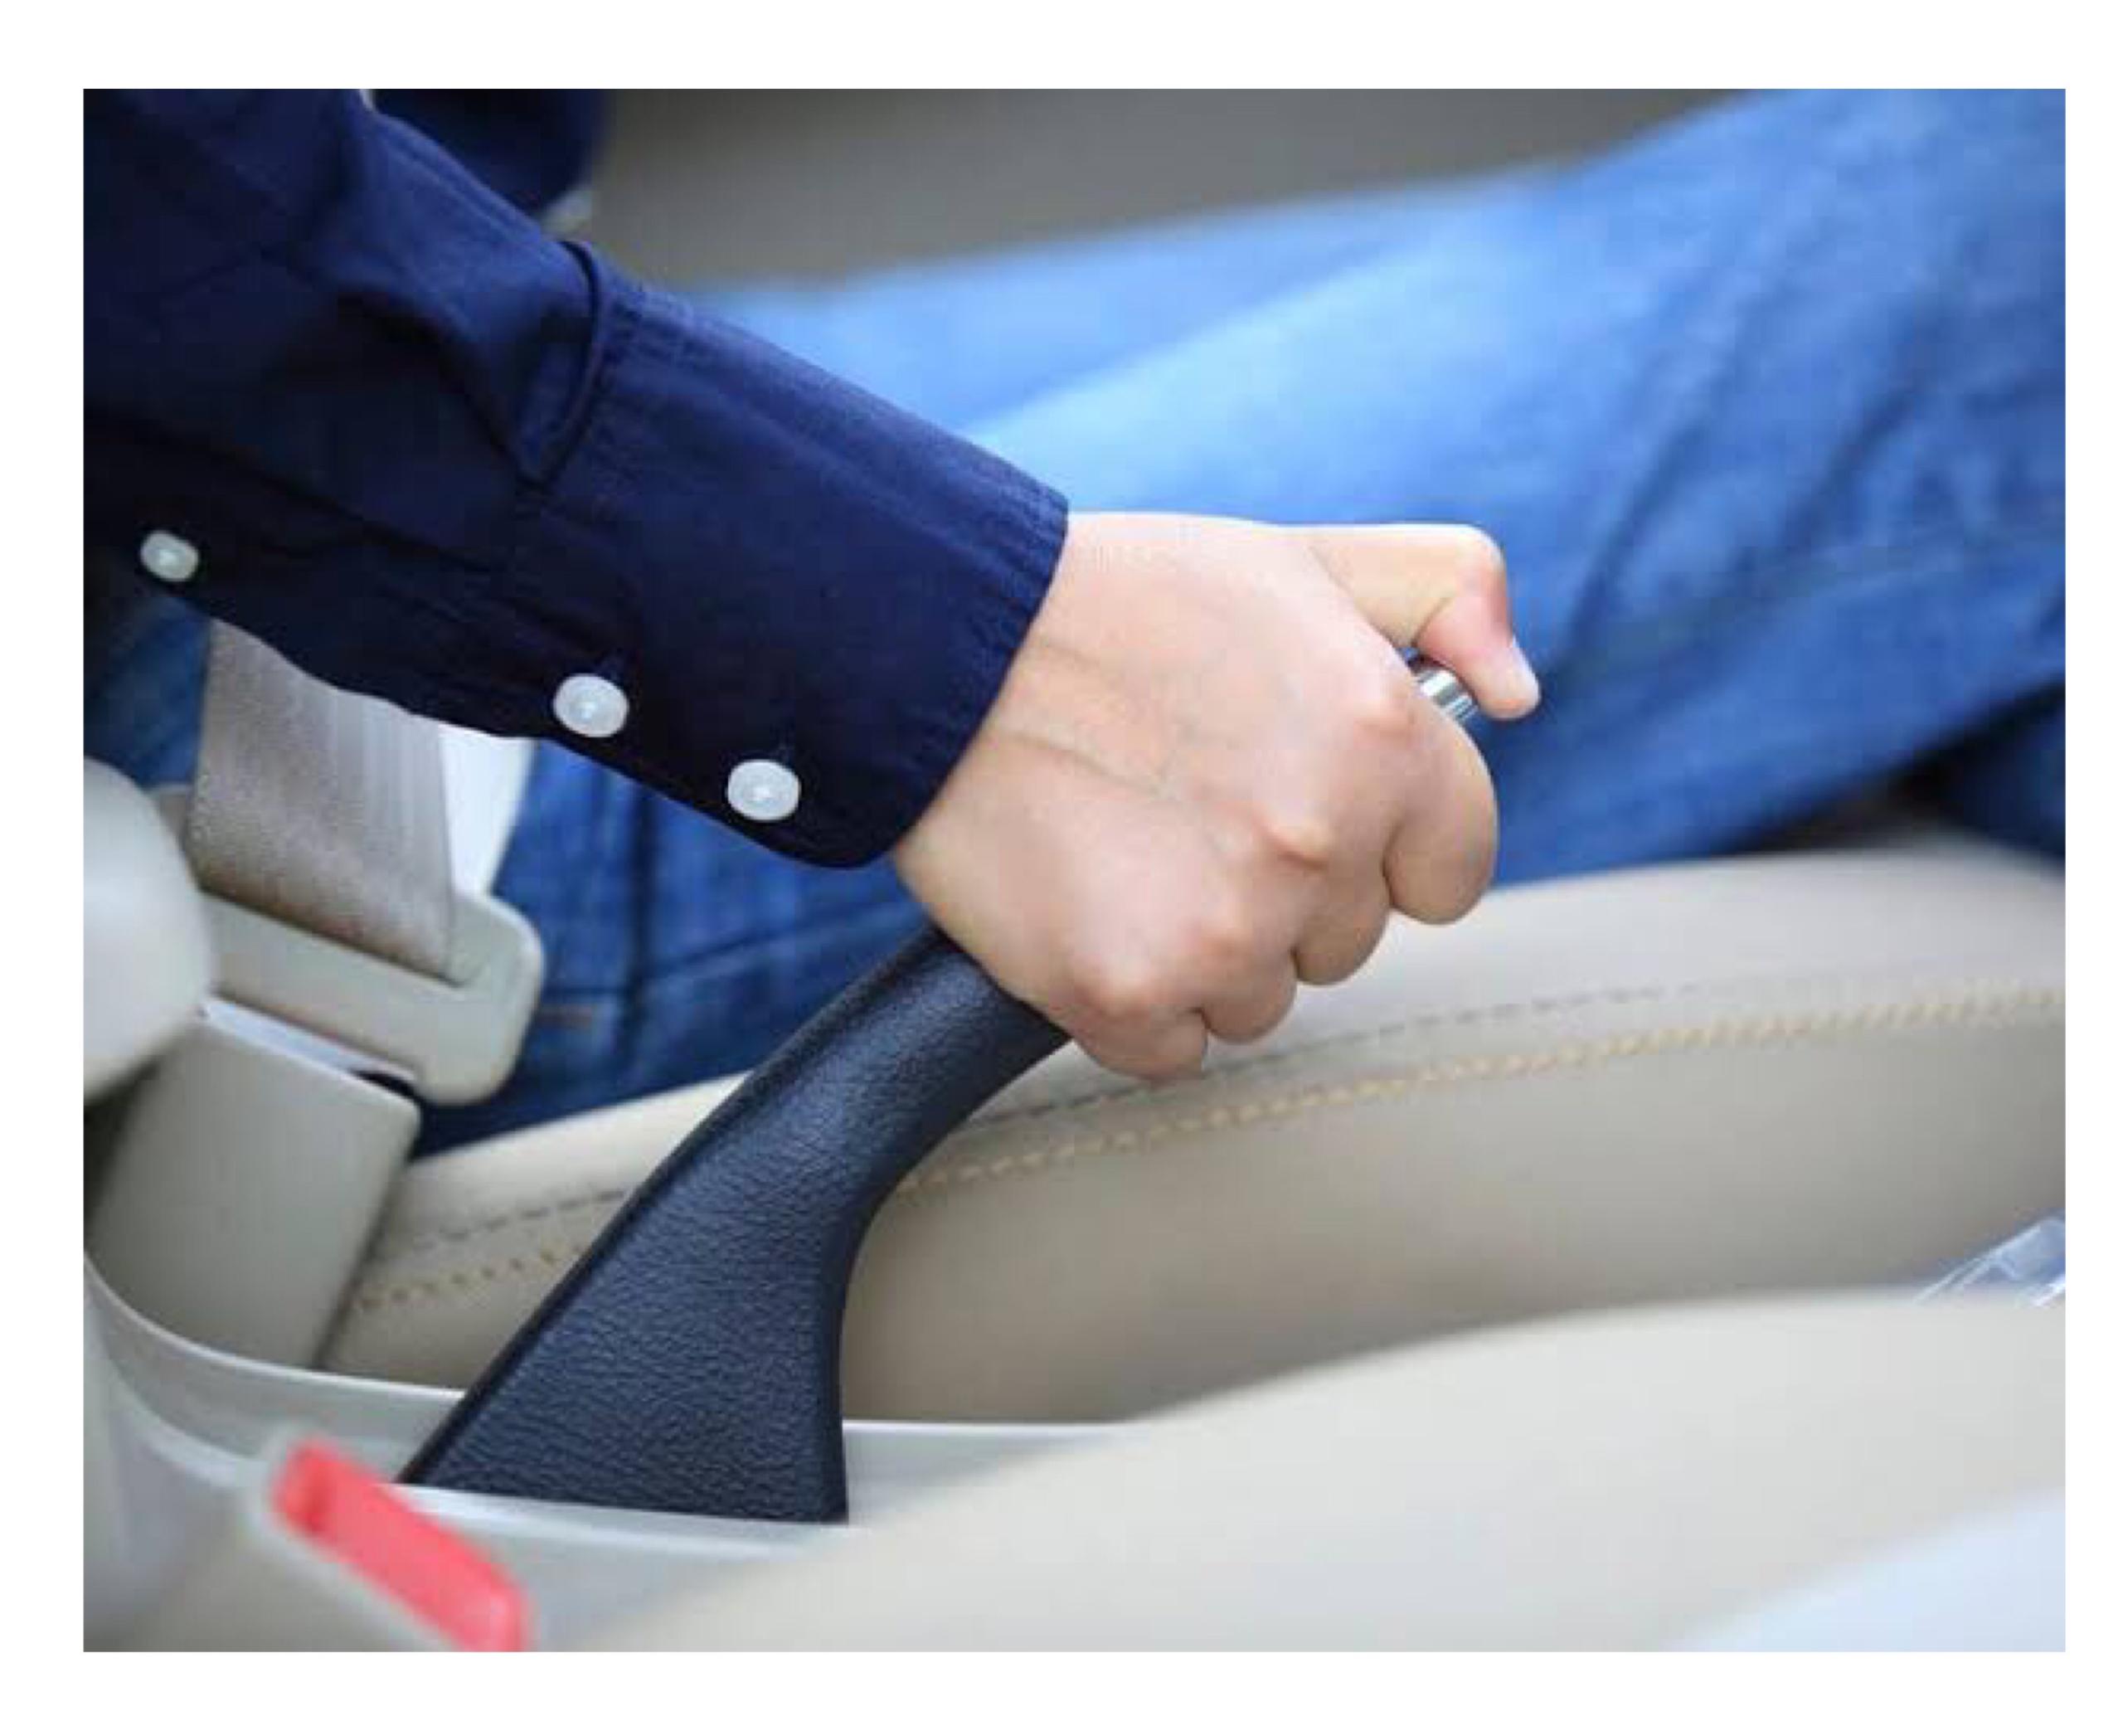 Helpful tips for using your car parking brake